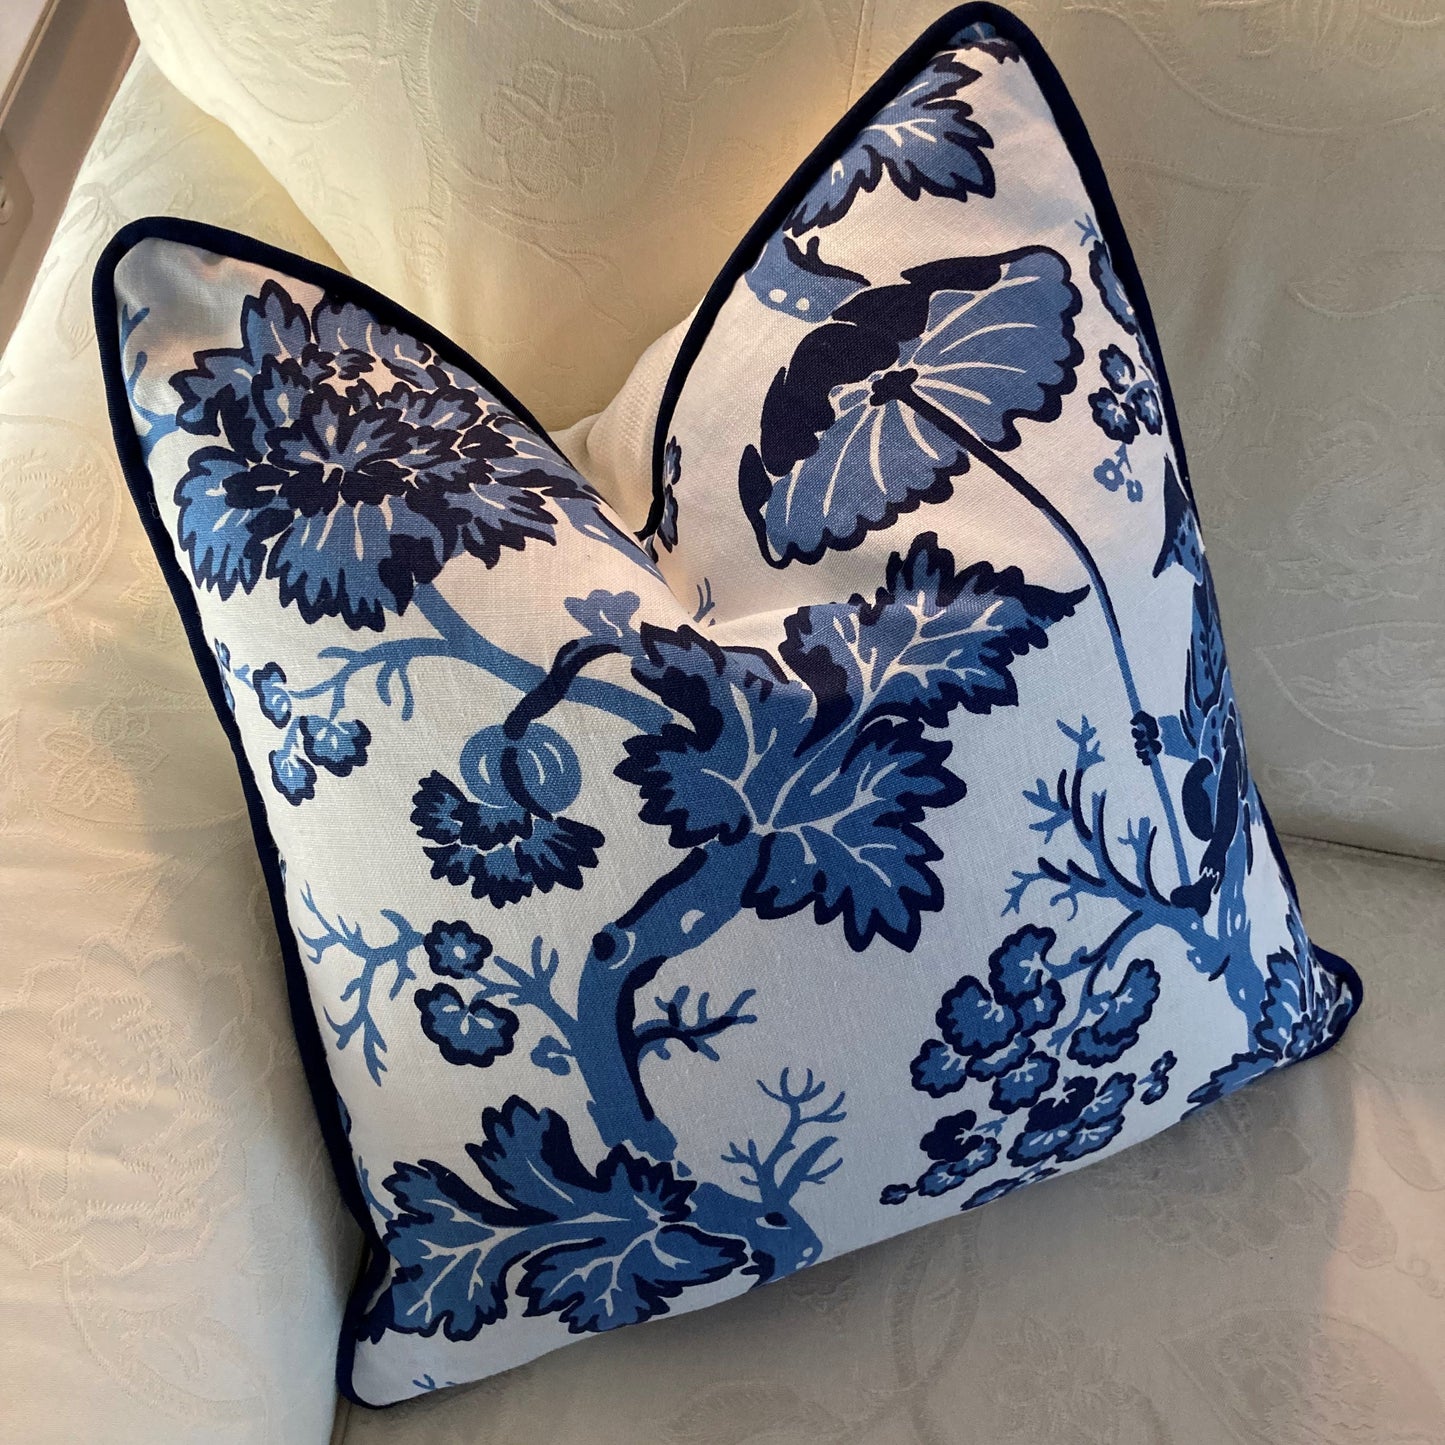 Paradise Chinoiserie Blue & White Toile 20 x 20 Square Decorative Pillow with Down Feather Insert